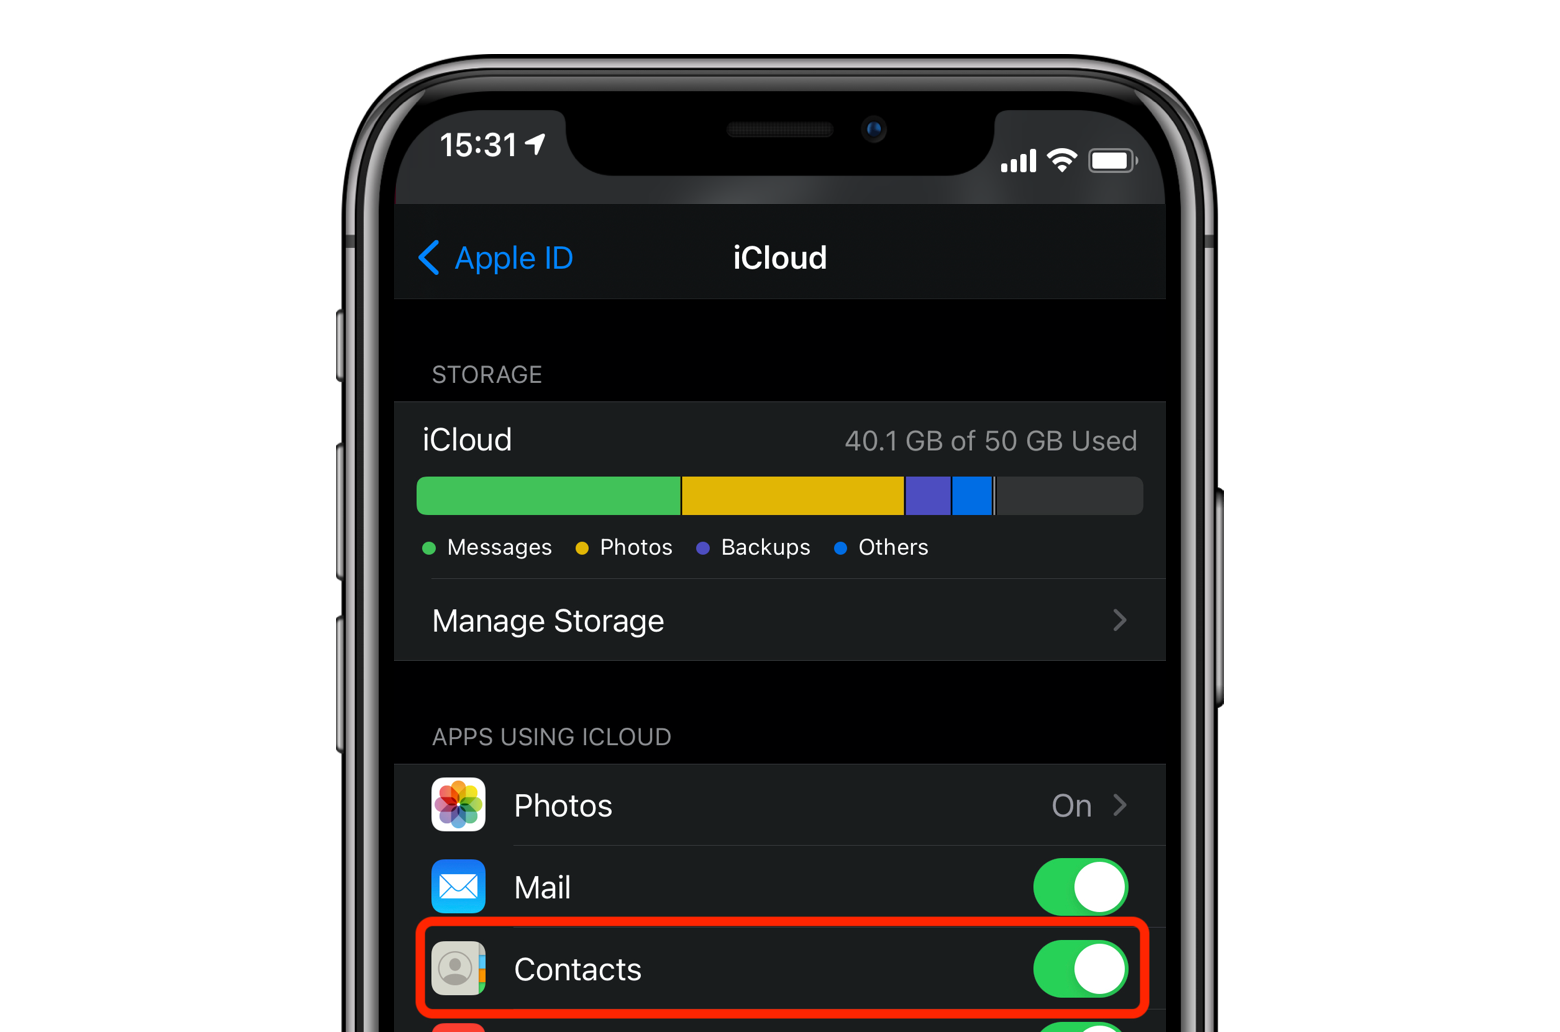 icloud contacts sync